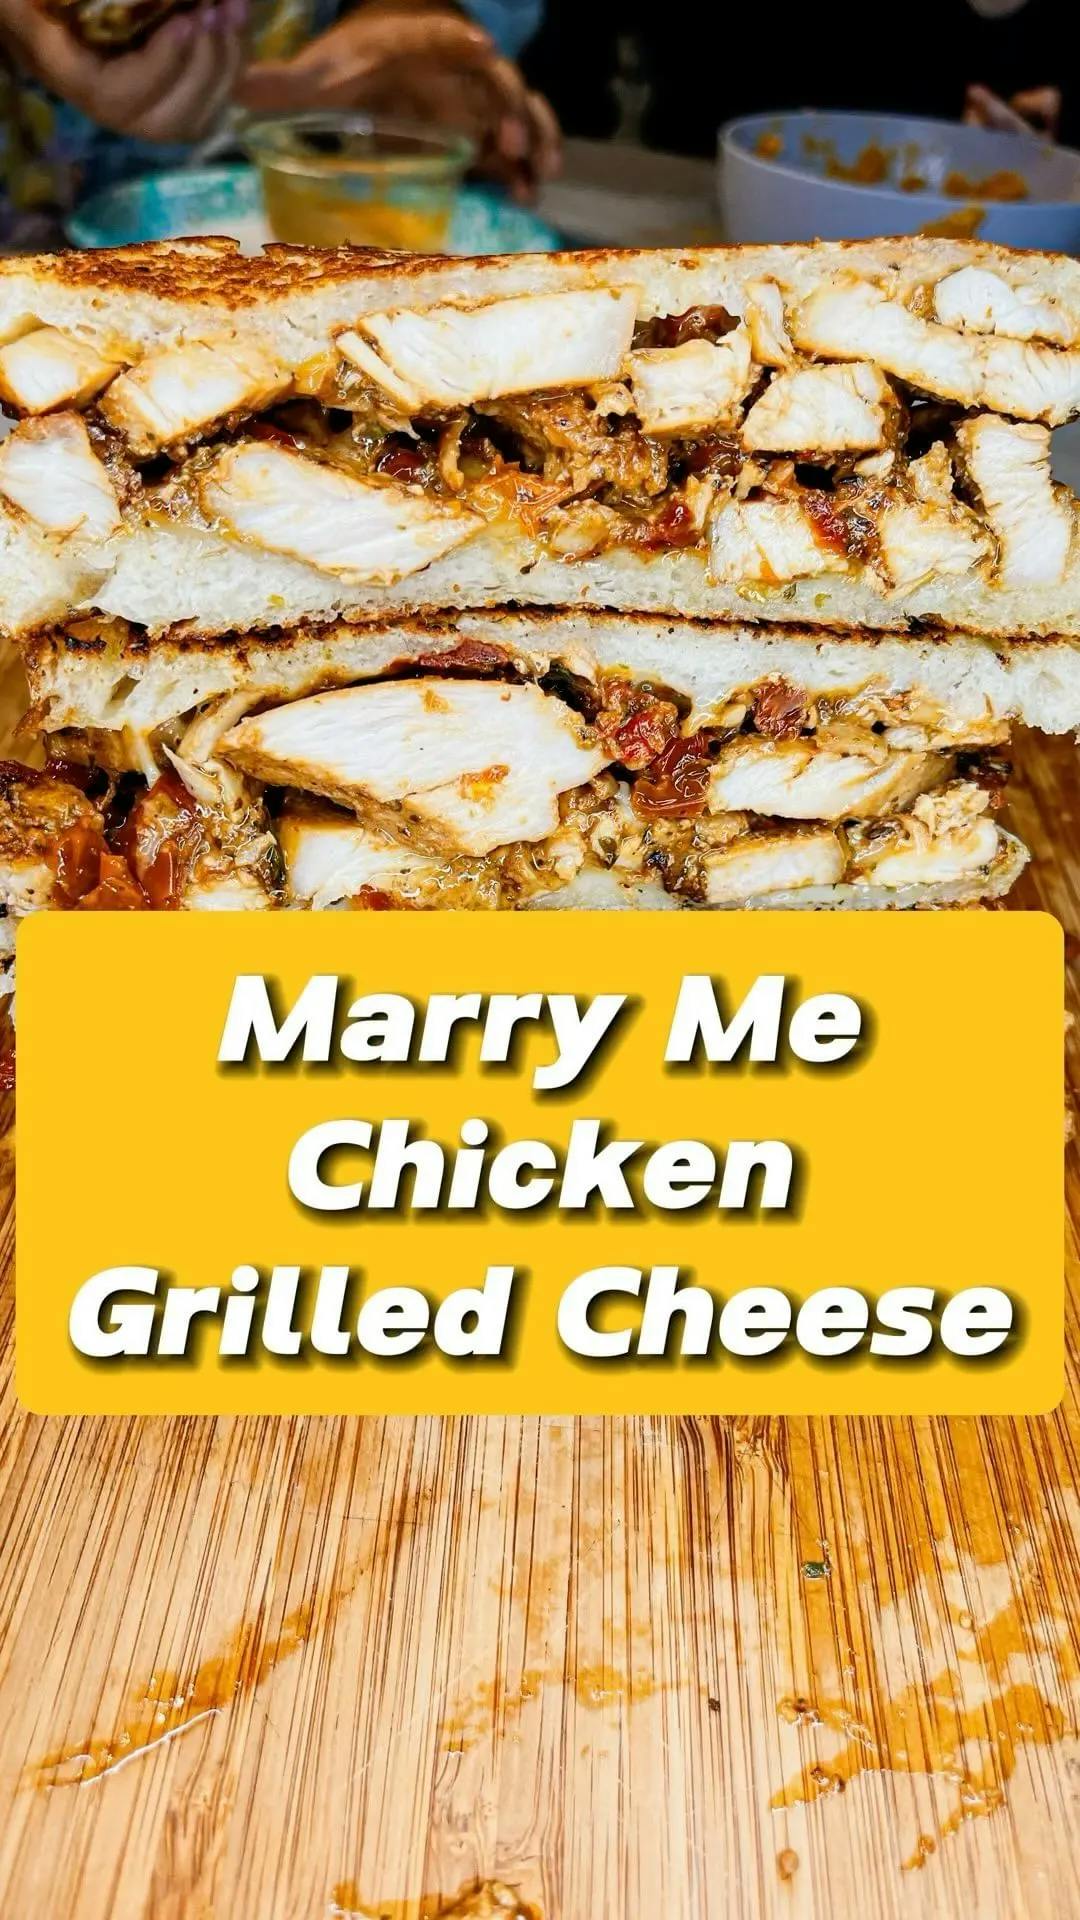 Picture for Marry Me Chicken Grilled Cheese